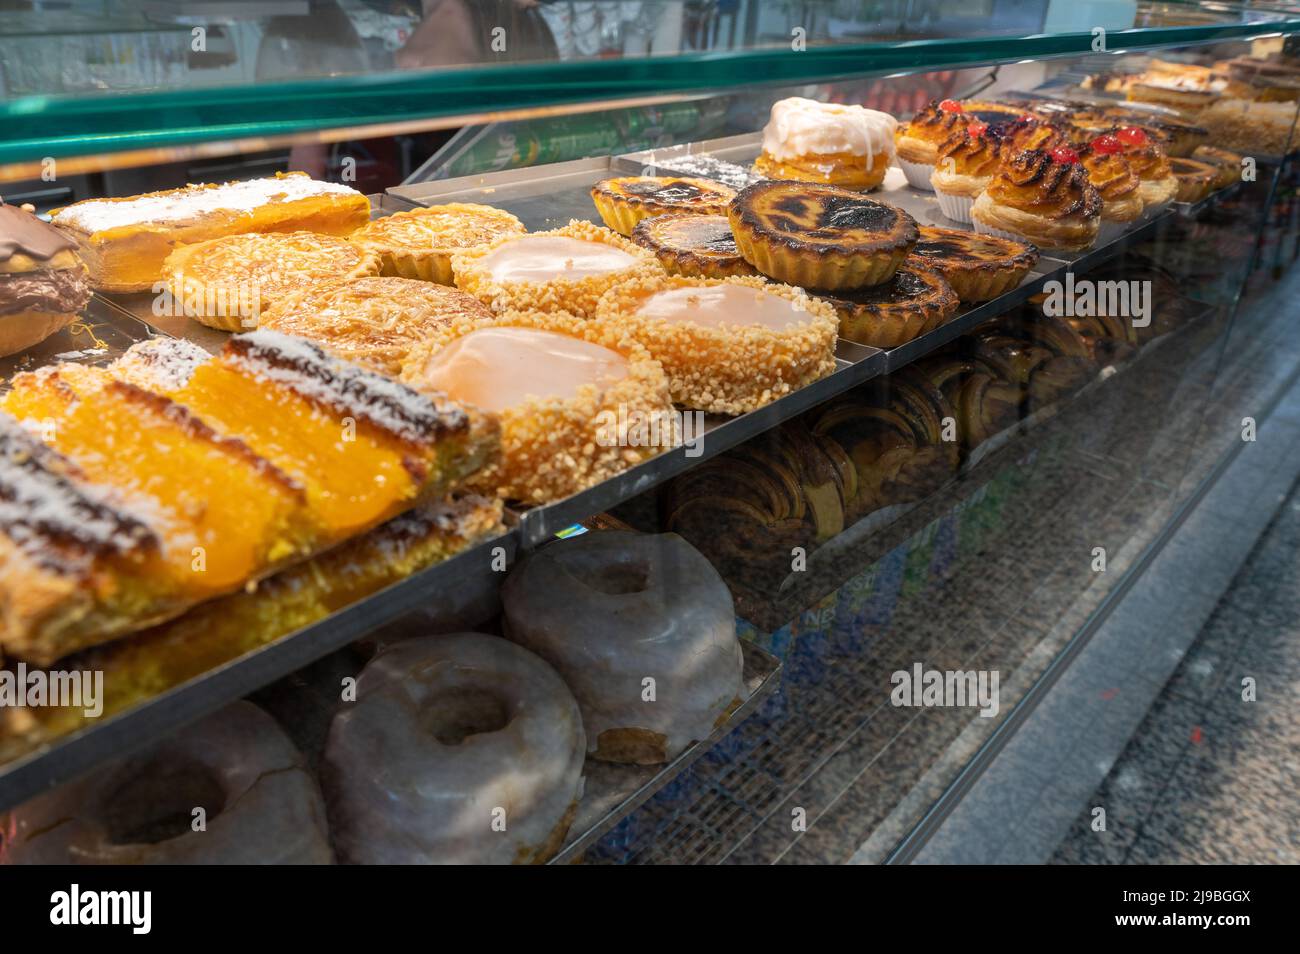 Fine pastry with typical products from Porto, Portugal. Stock Photo